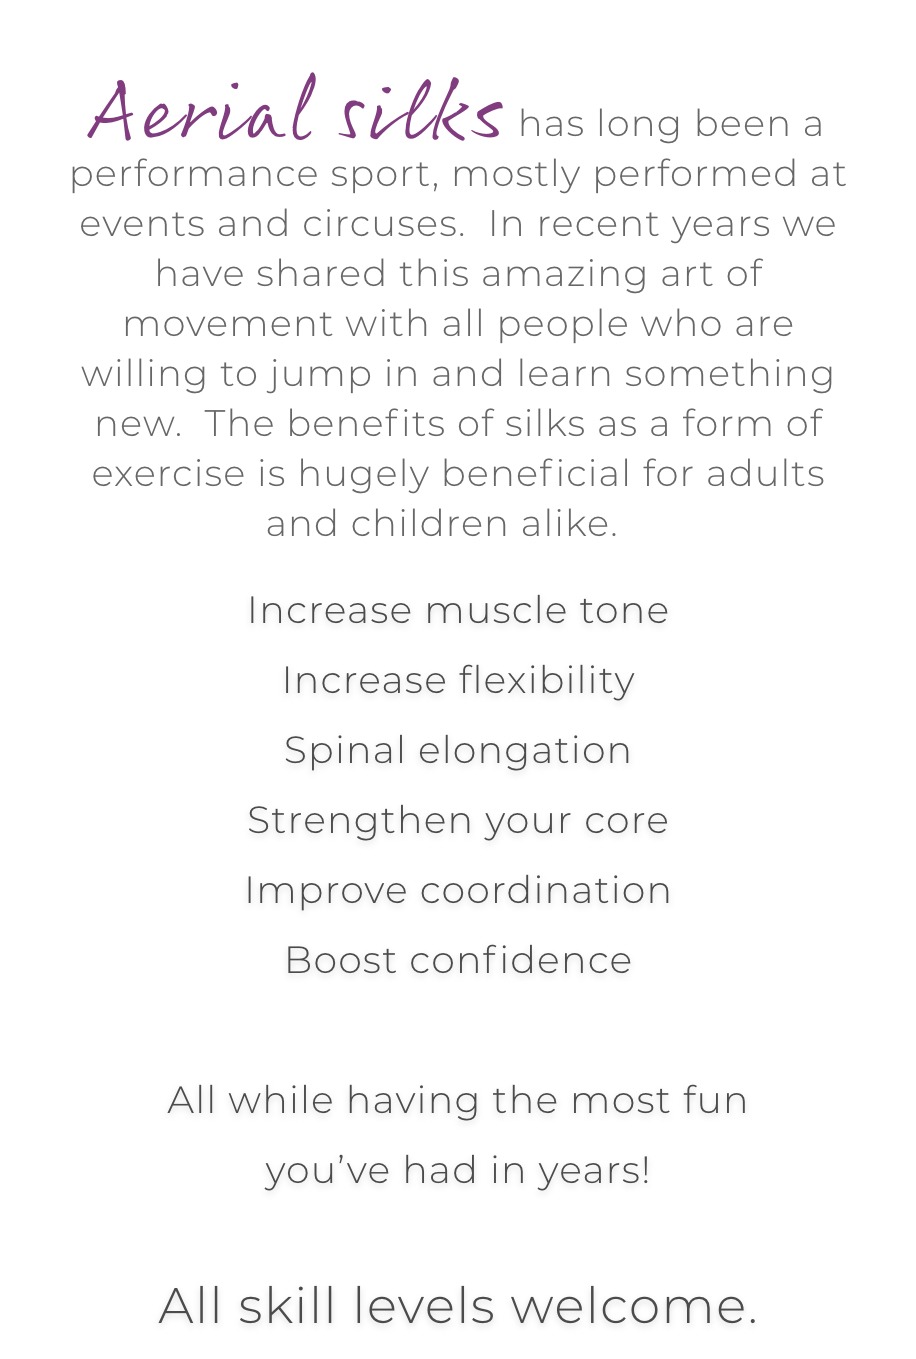 About Aerial Silks and benefits